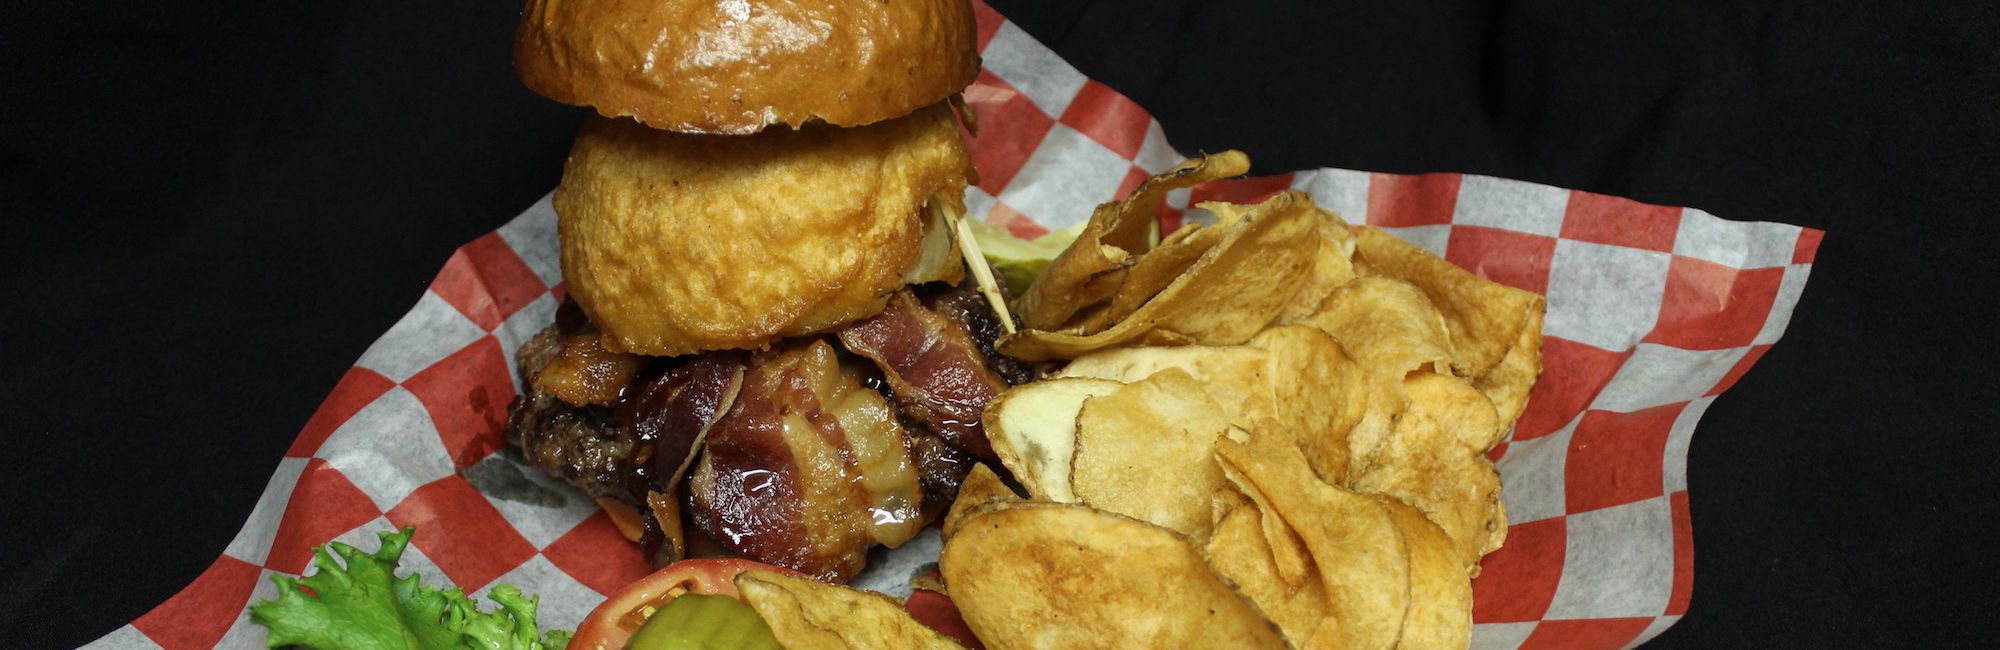 Beckett’s Burger Bar - The Best Place for Burgers in Bowling Green and Findlay & Now Delivered to Your Door!